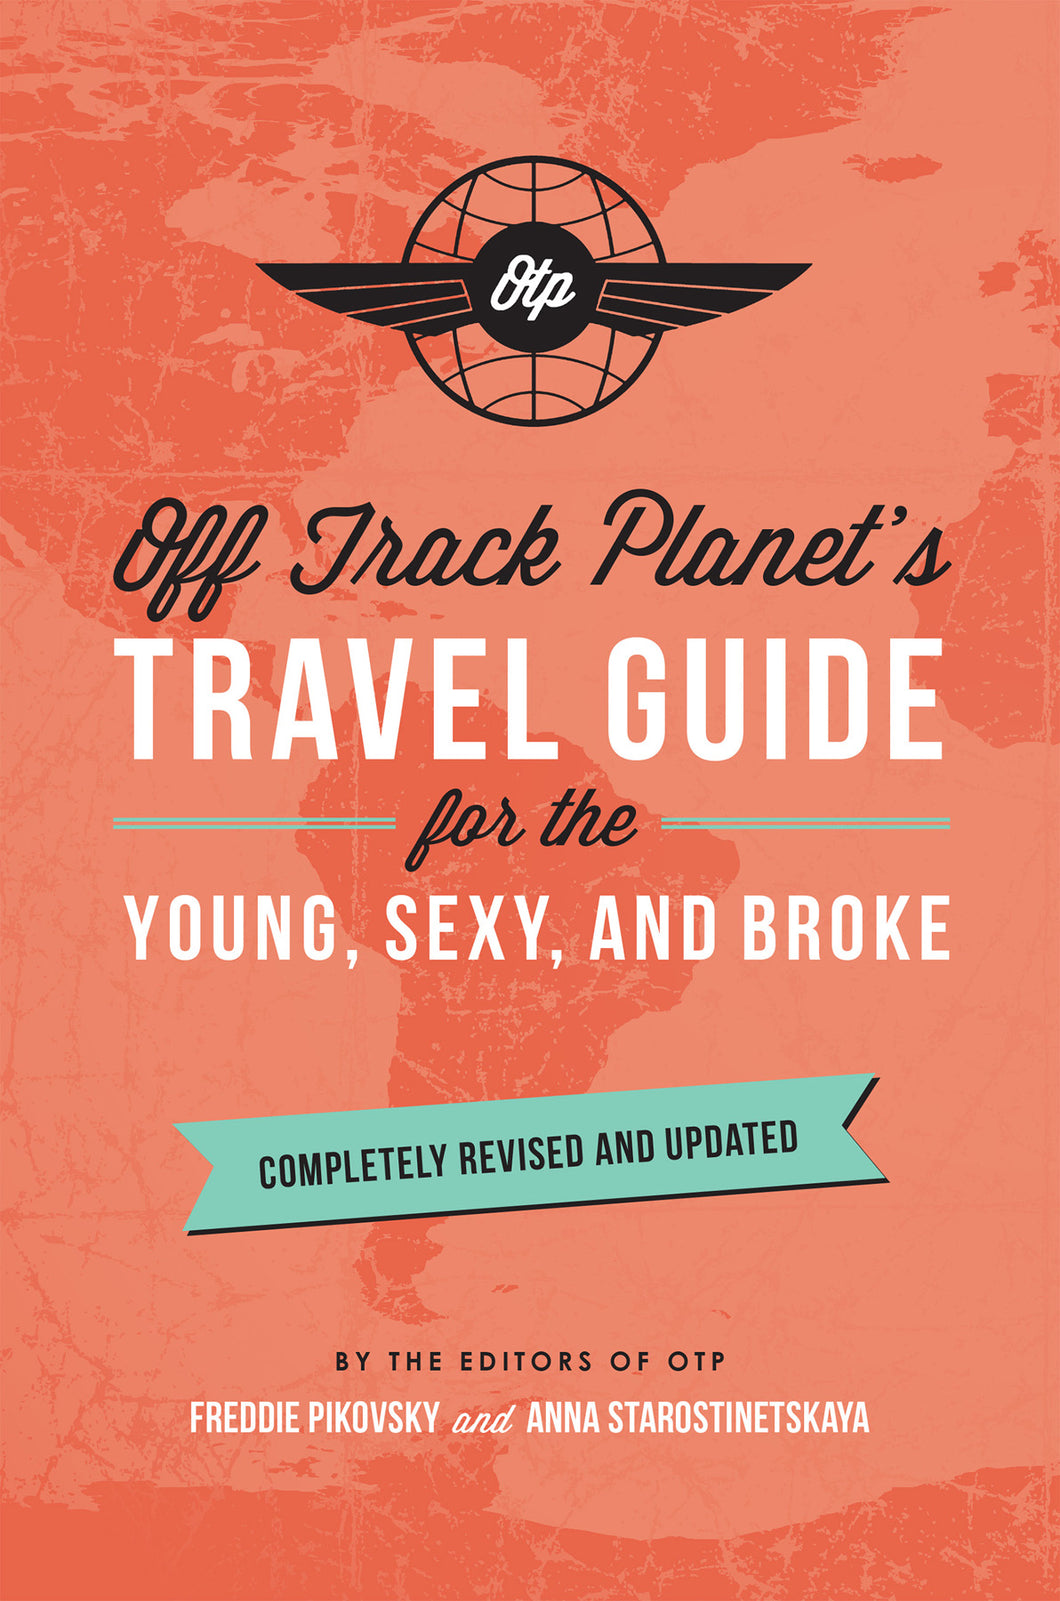 Off Track Planet's Travel Guide for the Young, Sexy, and, Broke